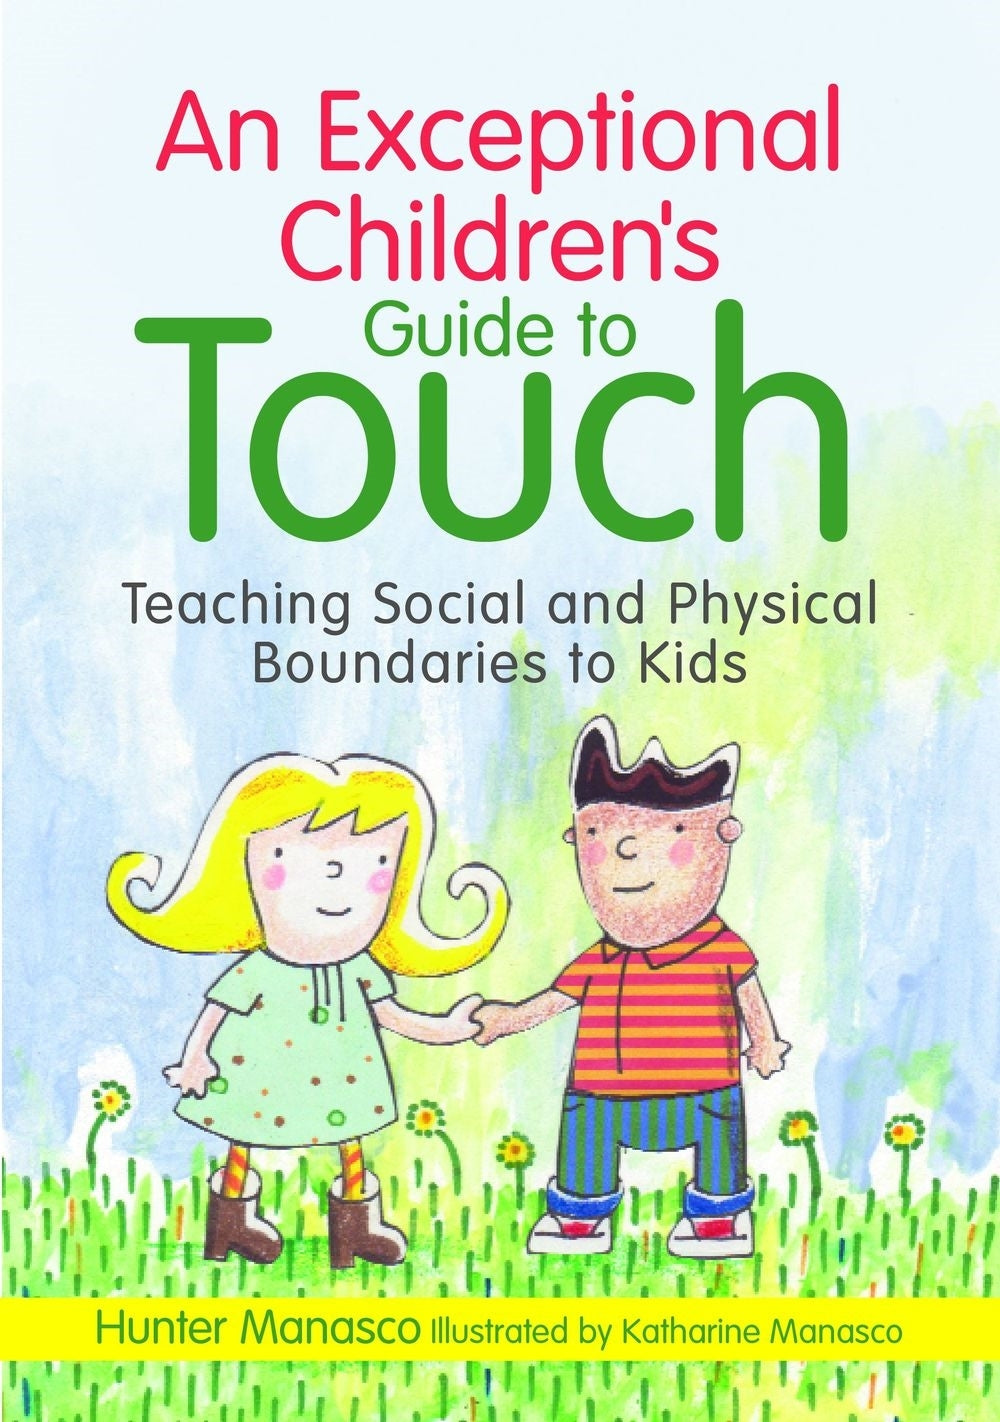 An Exceptional Children's Guide to Touch by McKinley Hunter Manasco, Katharine Manasco